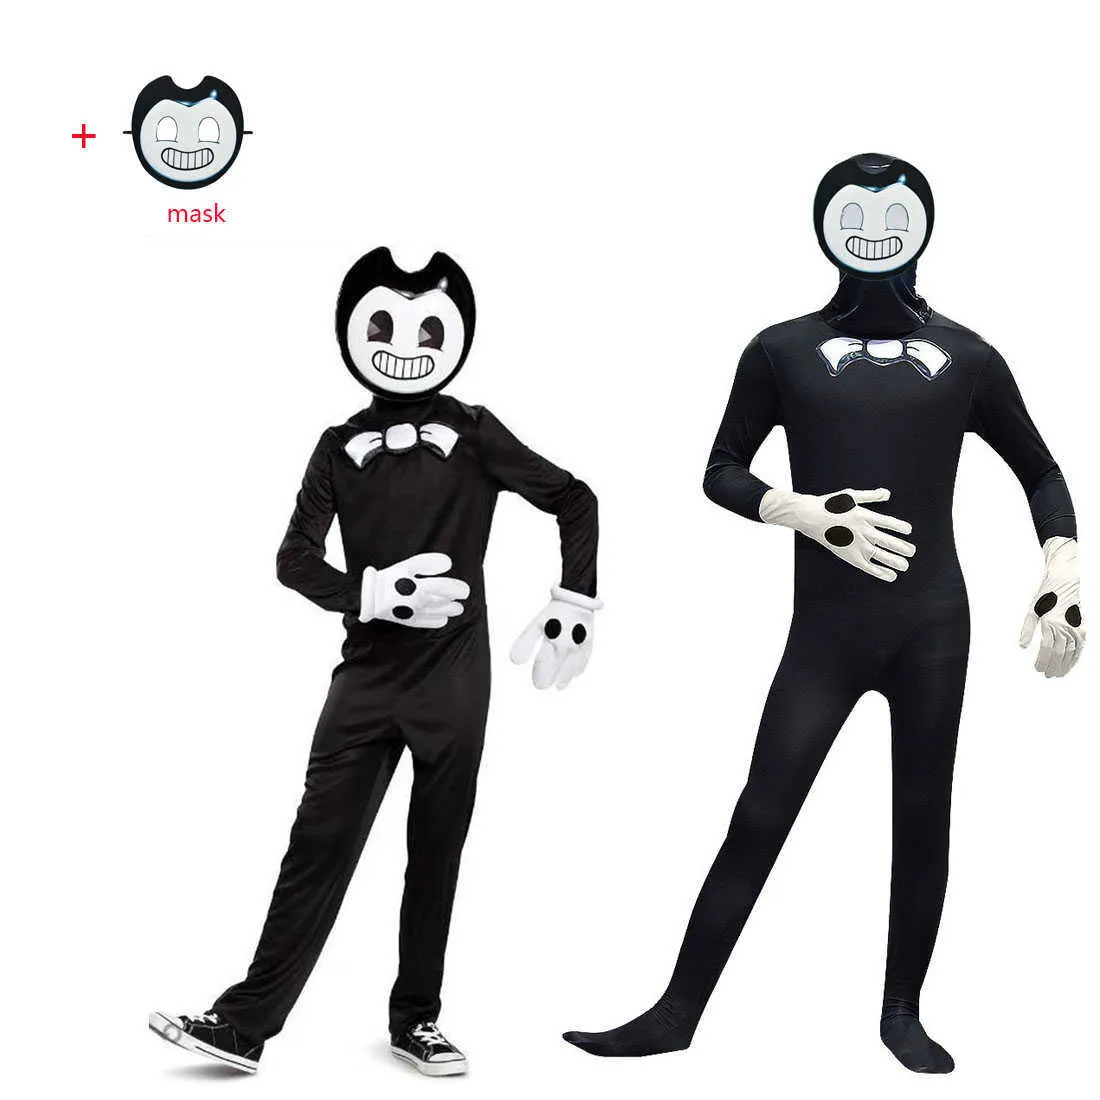 Kids Halloween Costumes Anime Bendy the ink machines Cosplay Boys Girls Bodysuit+wing Cartoon Disfraces Carnival Party Clothing G0925